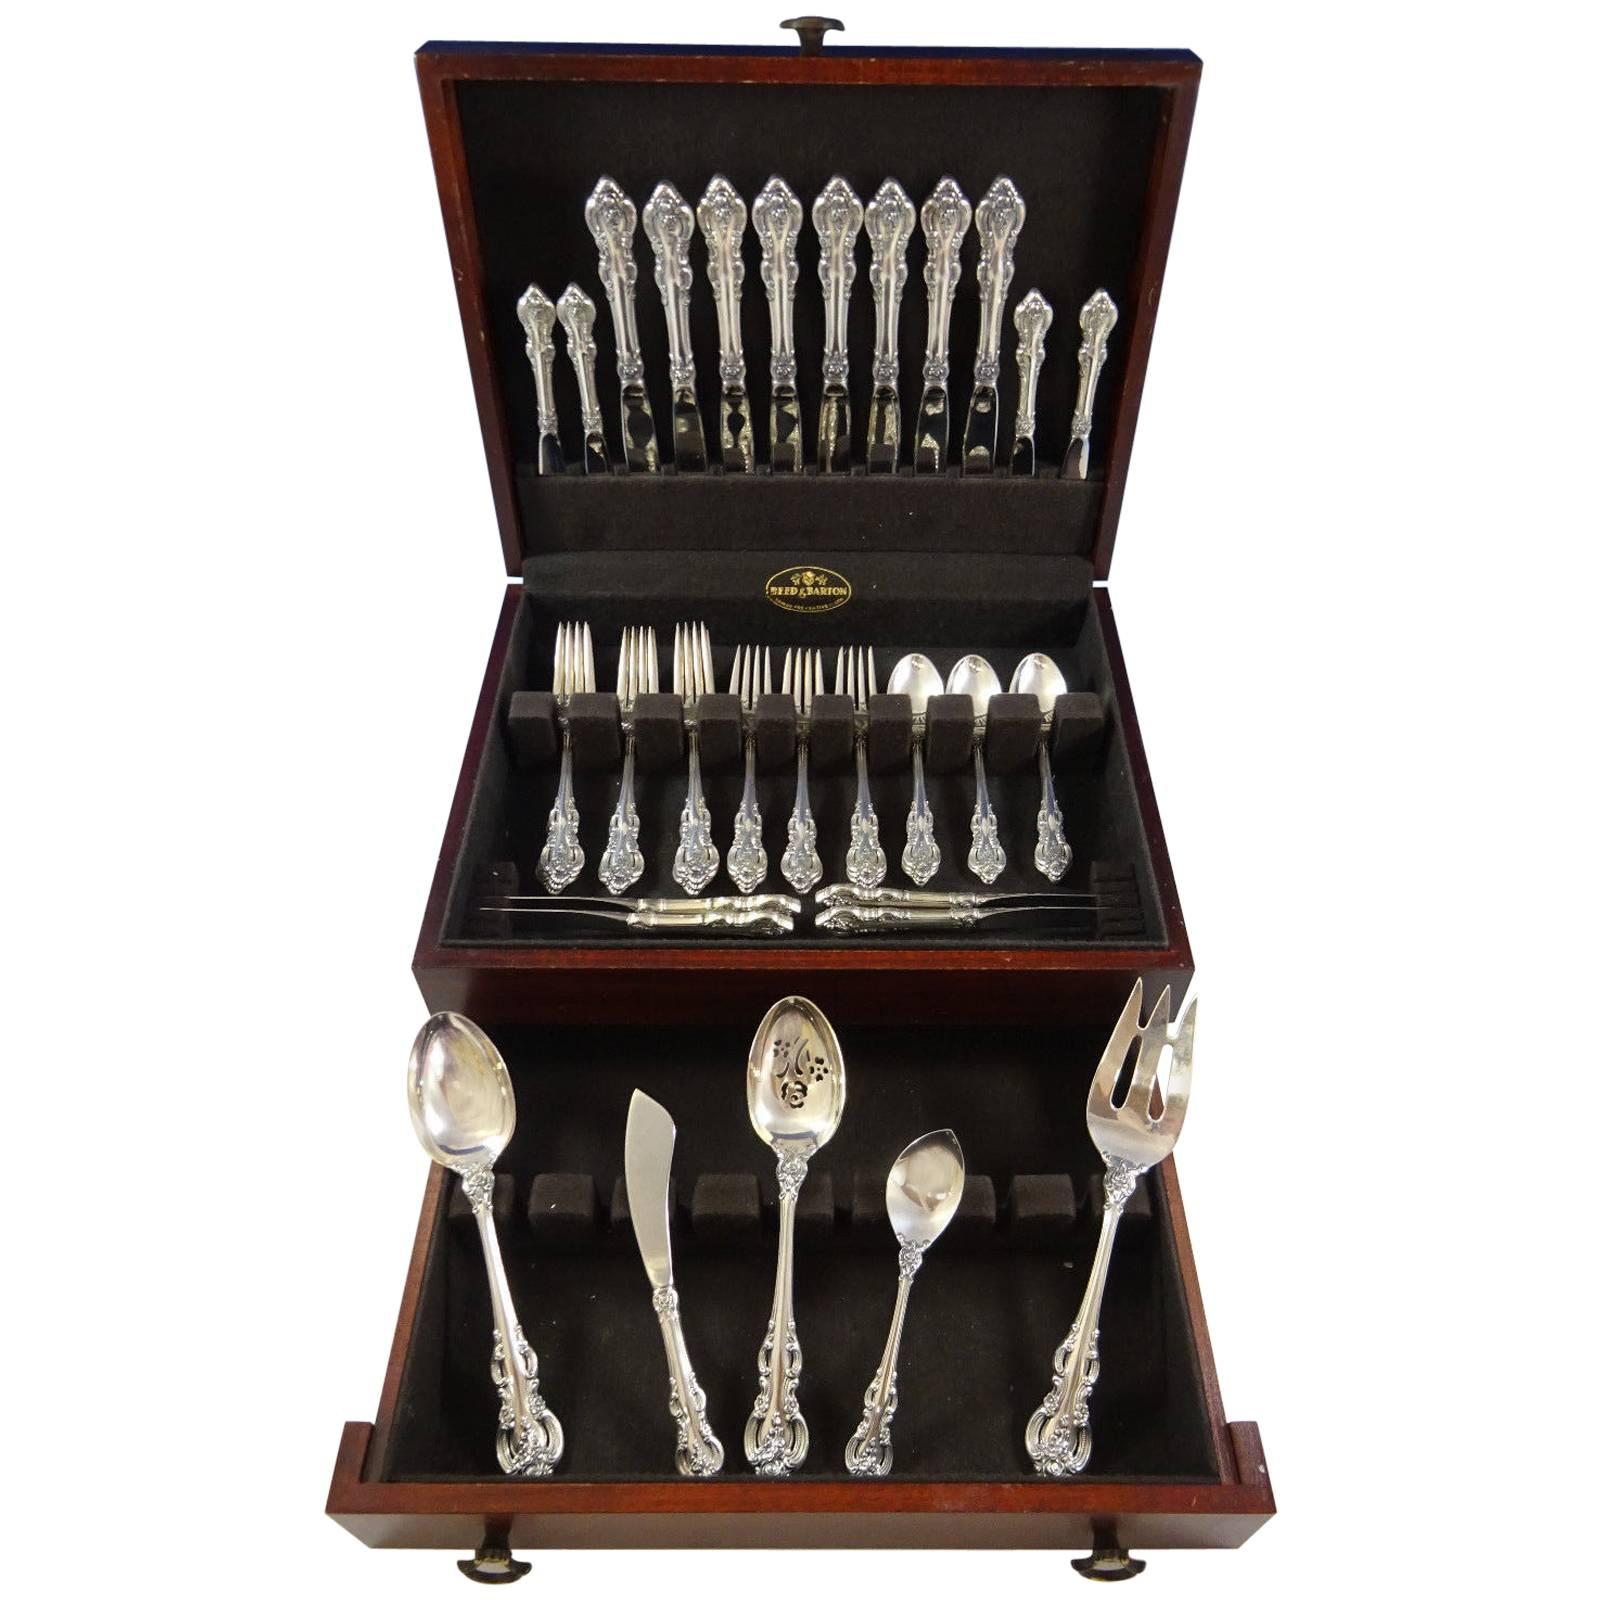 Lavish, handcrafted detailing graces the stem and handle of this pattern. El Grandee is a richly designed, highly sophisticated addition to any formal setting.
 
 El Grandee by Towle sterling silver flatware set of 45 pieces. This set